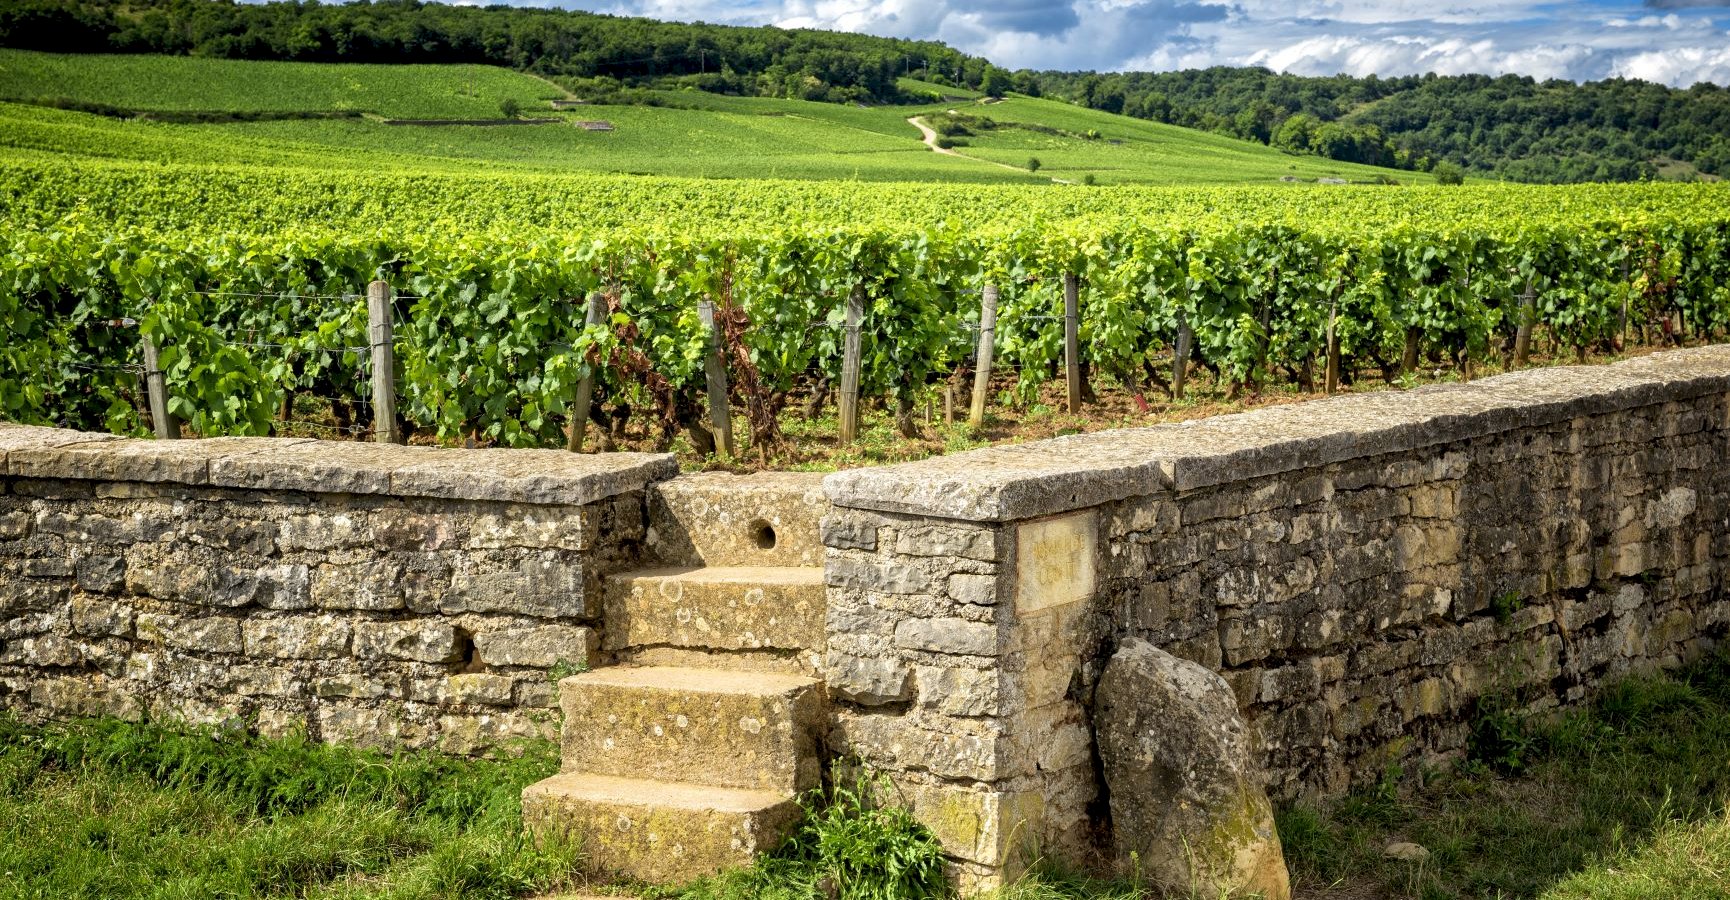 Ophorus Tours - 4 Days Private Burgundy Wine Tour Packages - Dijon - 3* Hotel